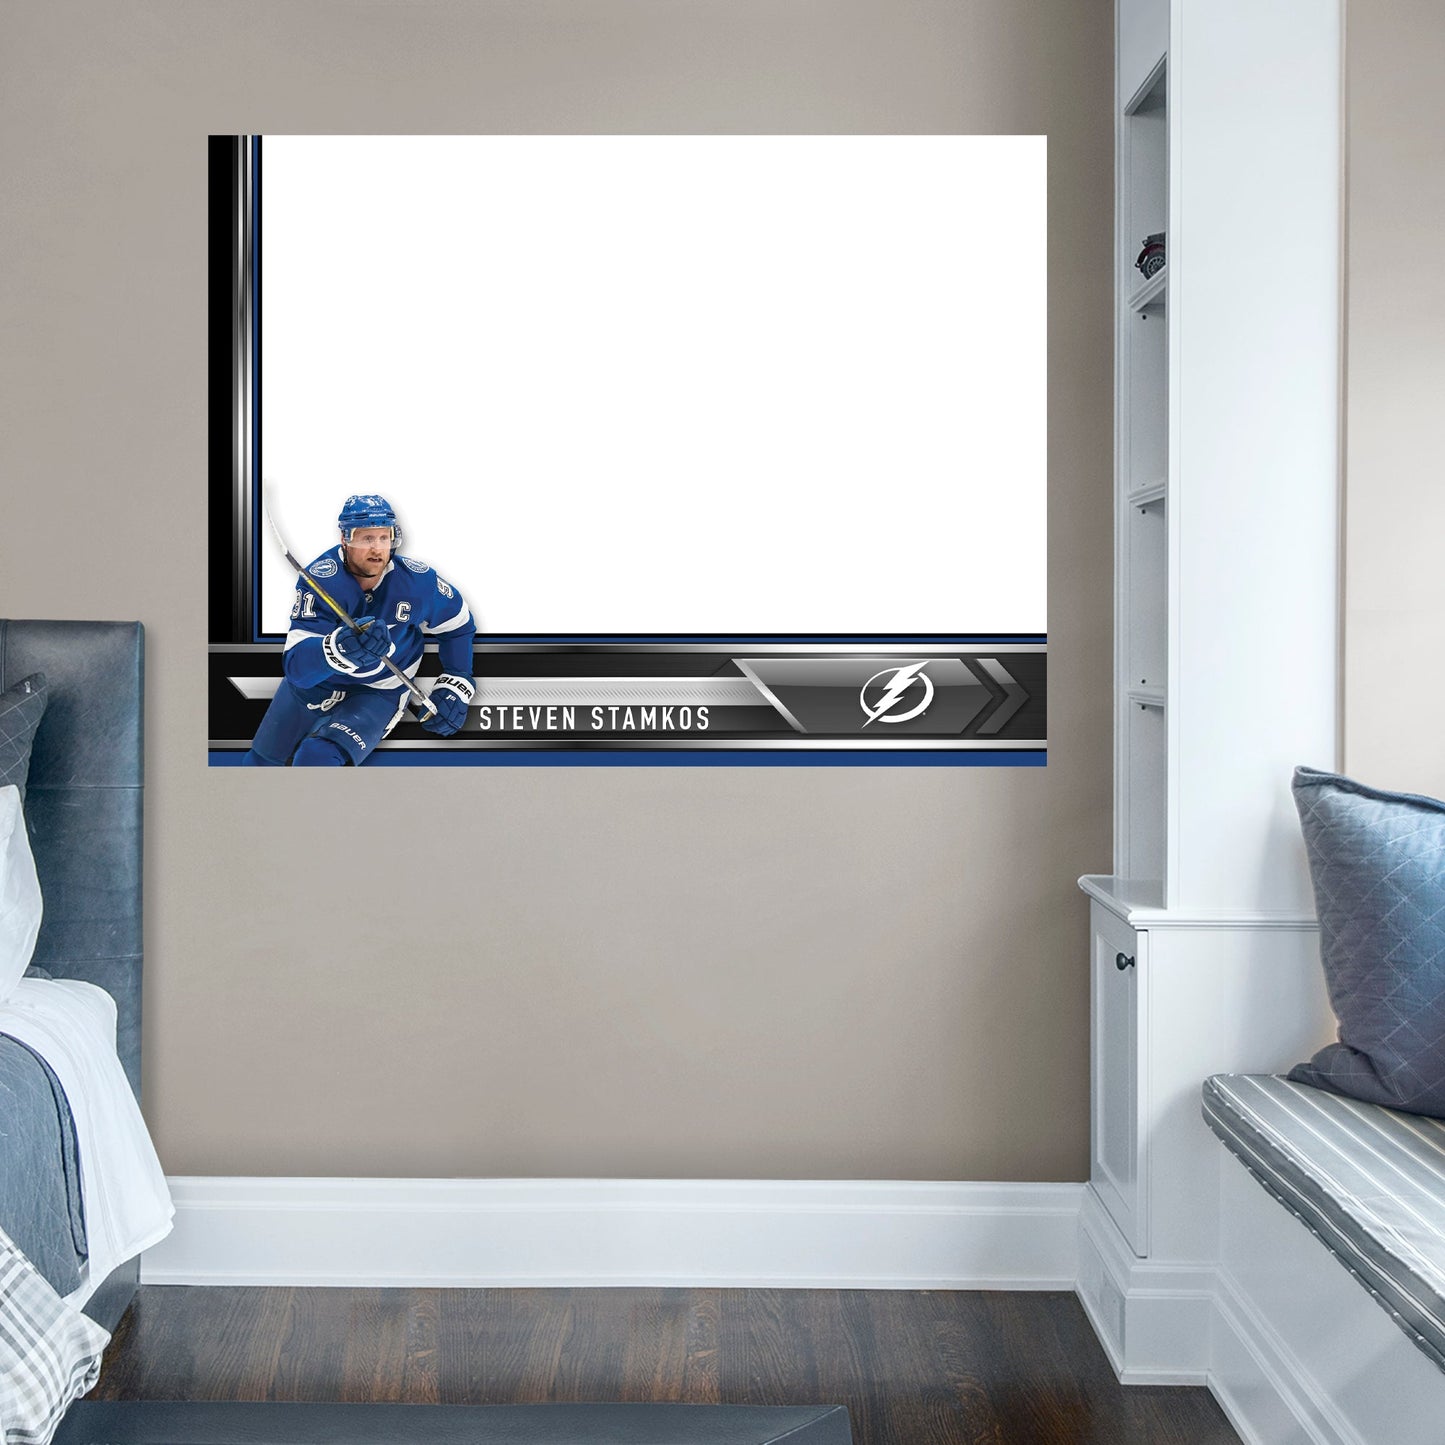 Tampa Bay Lightning: Steven Stamkos Dry Erase Whiteboard - Officially Licensed NHL Removable Adhesive Decal